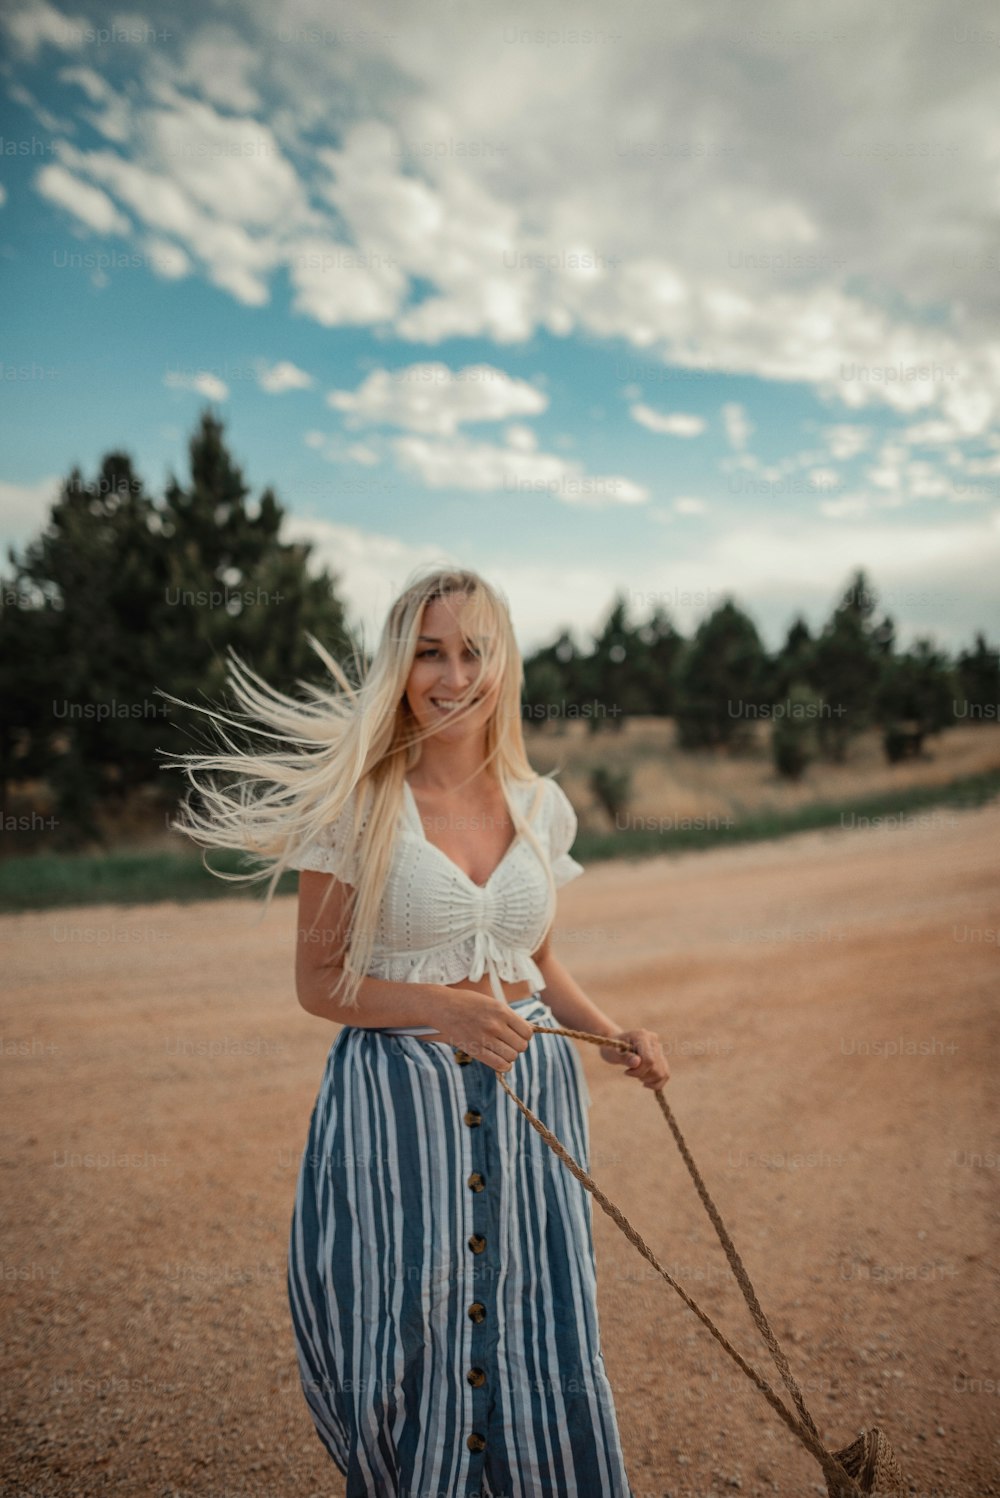 a woman with long blonde hair holding a stick